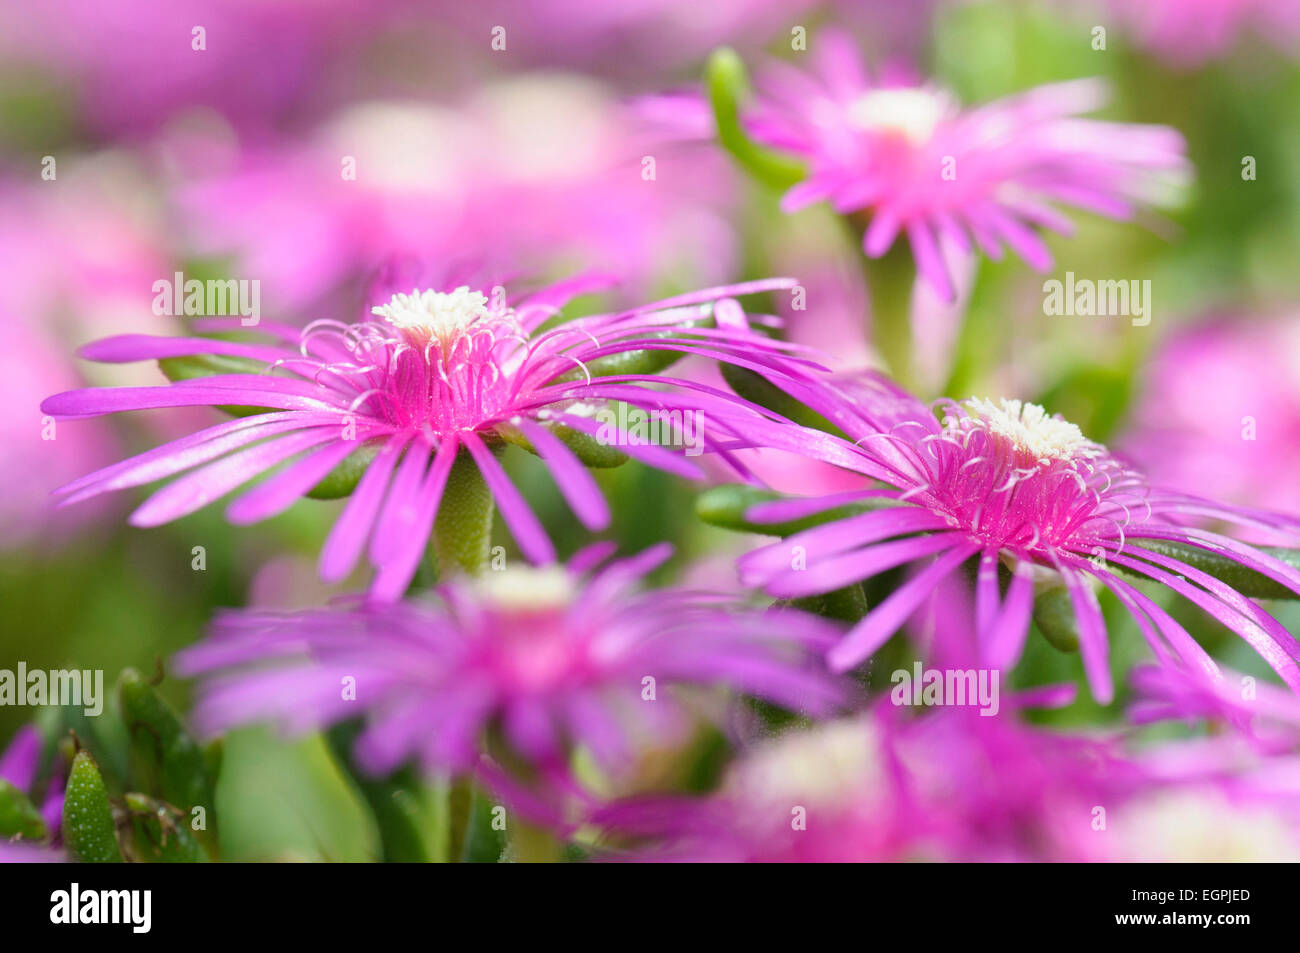 Trailing ice plant, Delosperma cooperi, Side few of a few open vivid pink flowers with unusual central stamens. Stock Photo